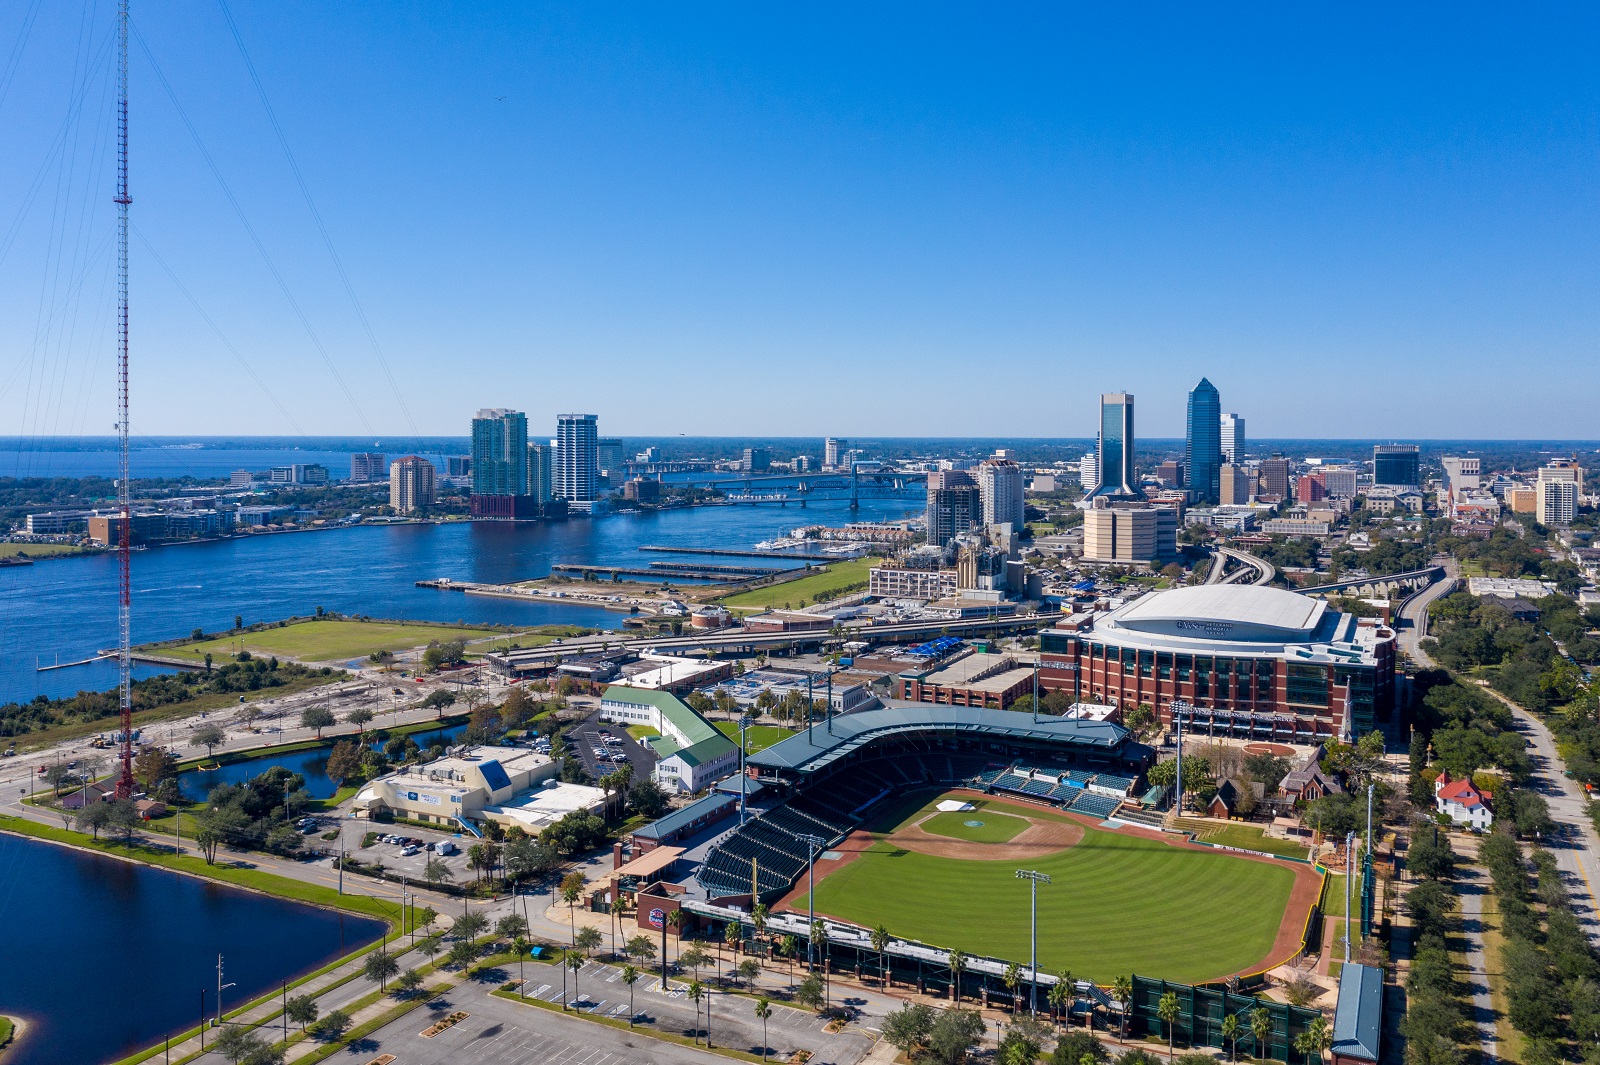 <p class="wp-caption-text">Image Credit: Shutterstock / NEFLO PHOTO</p>  <p><span>Jacksonville’s expansive geographic area makes driving the most practical mode of transportation. Traffic is typically light compared to other major cities.</span></p>